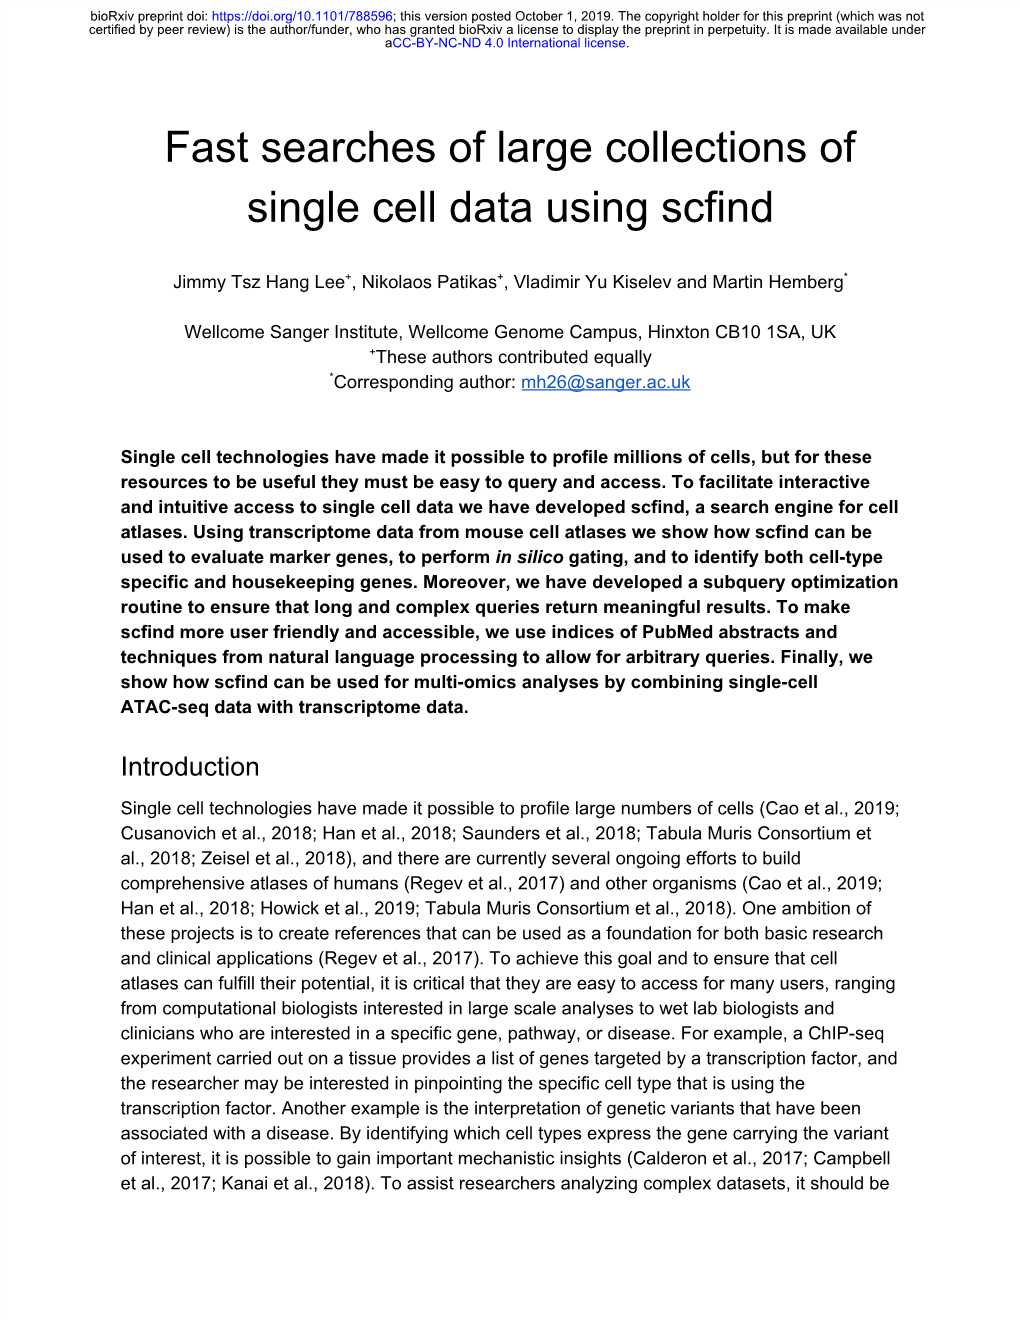 Fast Searches of Large Collections of Single Cell Data Using Scfind